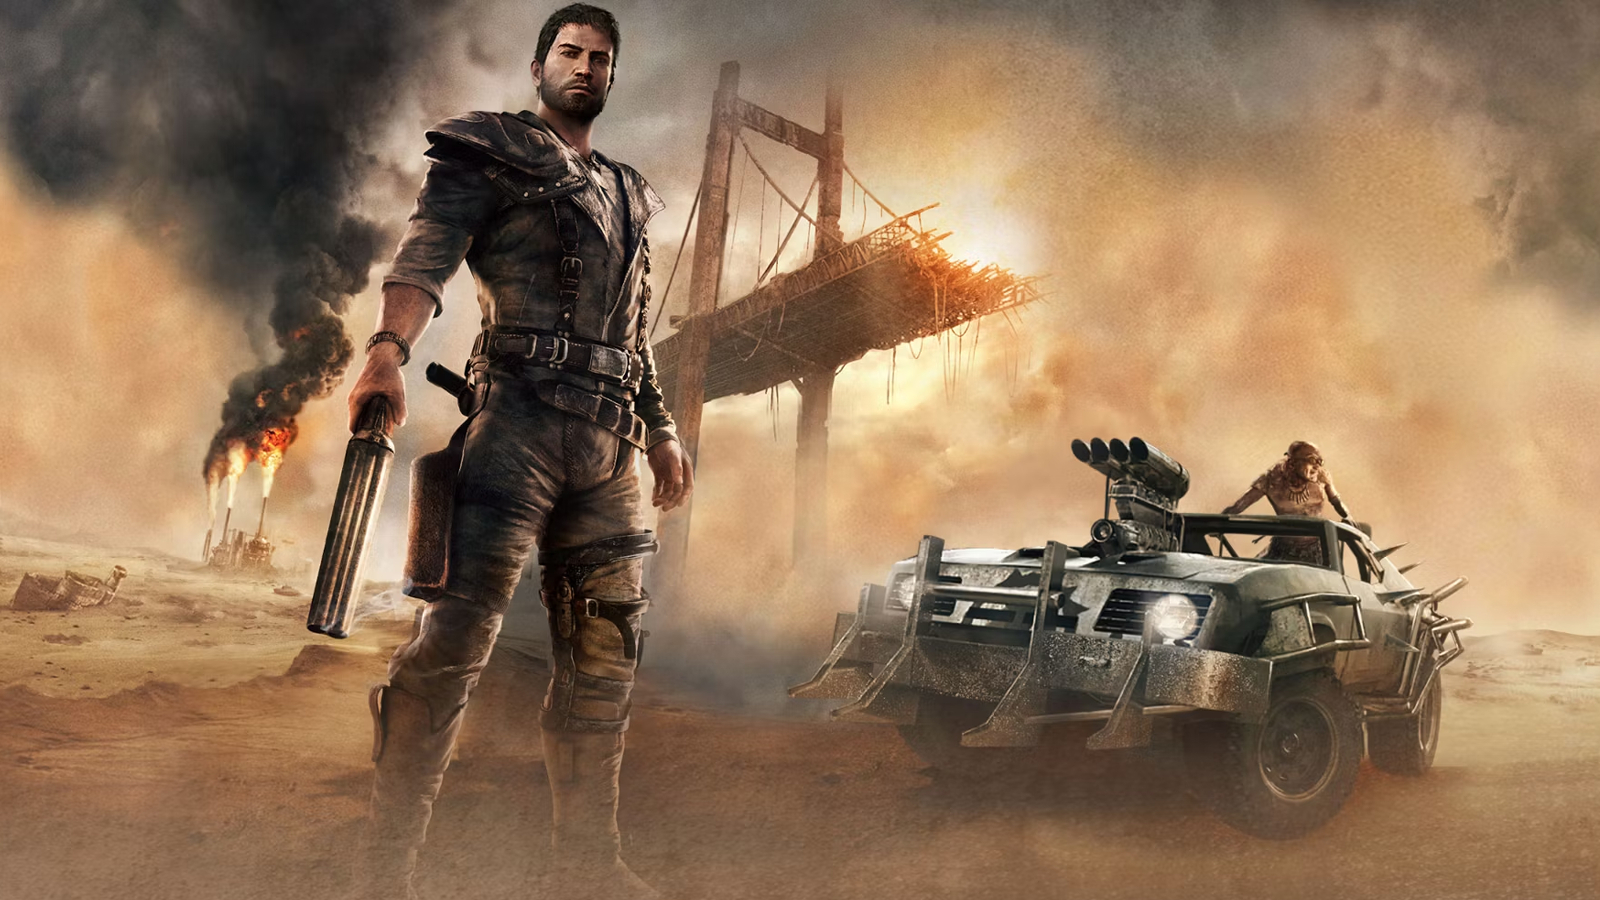 Key art for the 2015 Mad Max video game